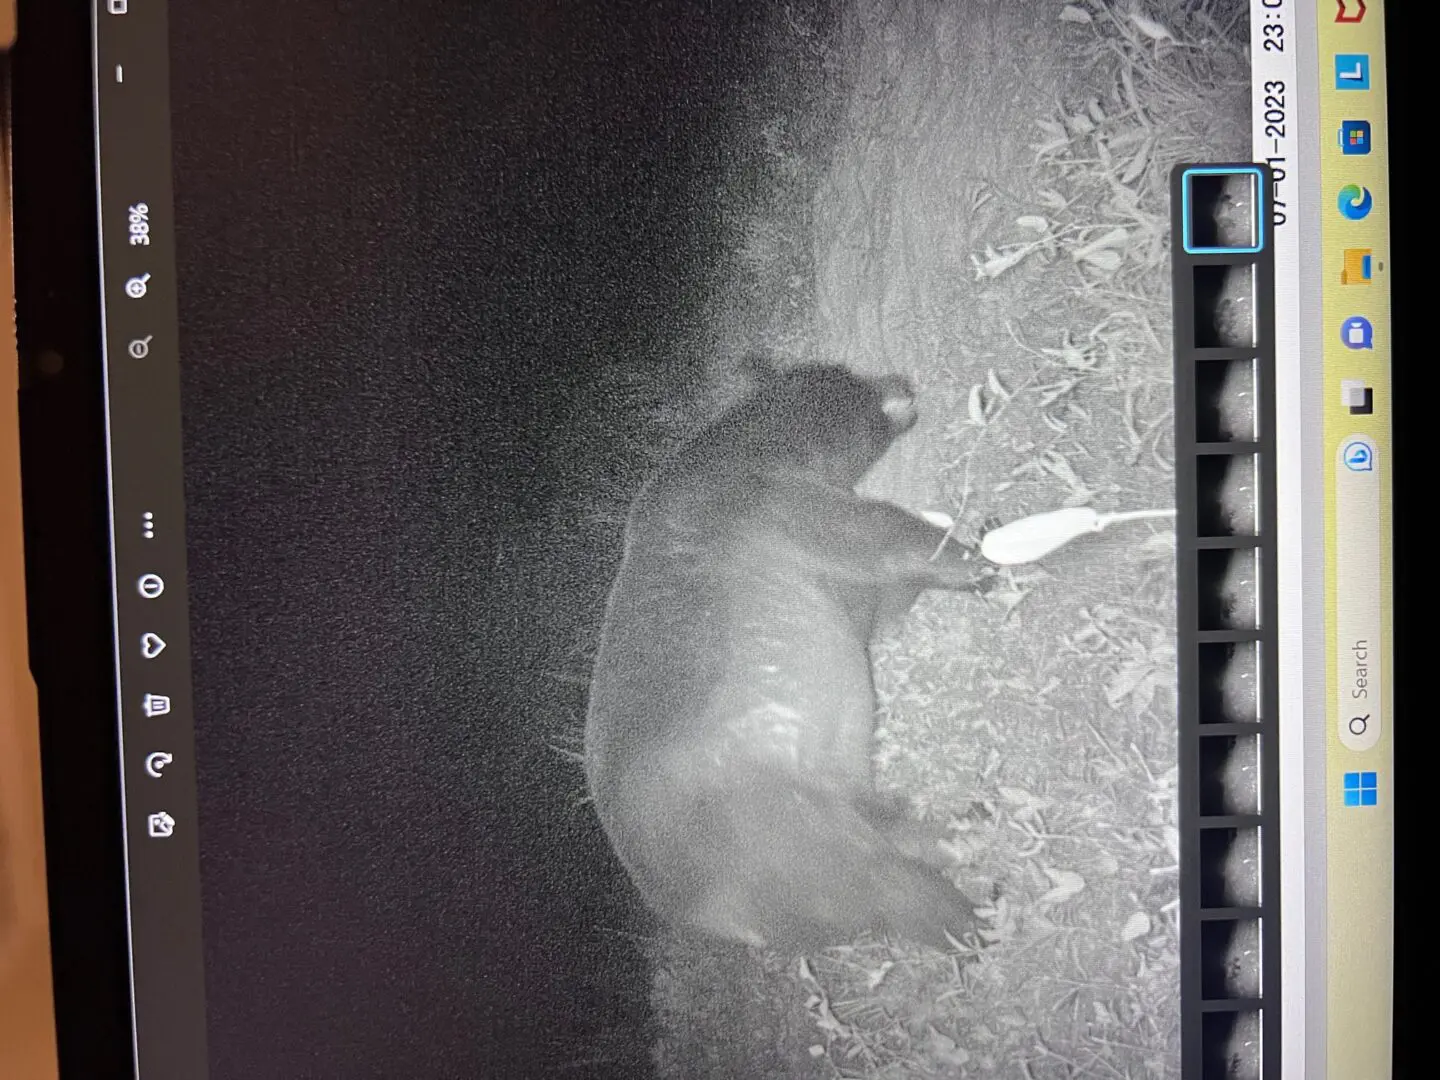 A bear is walking in the grass at night.